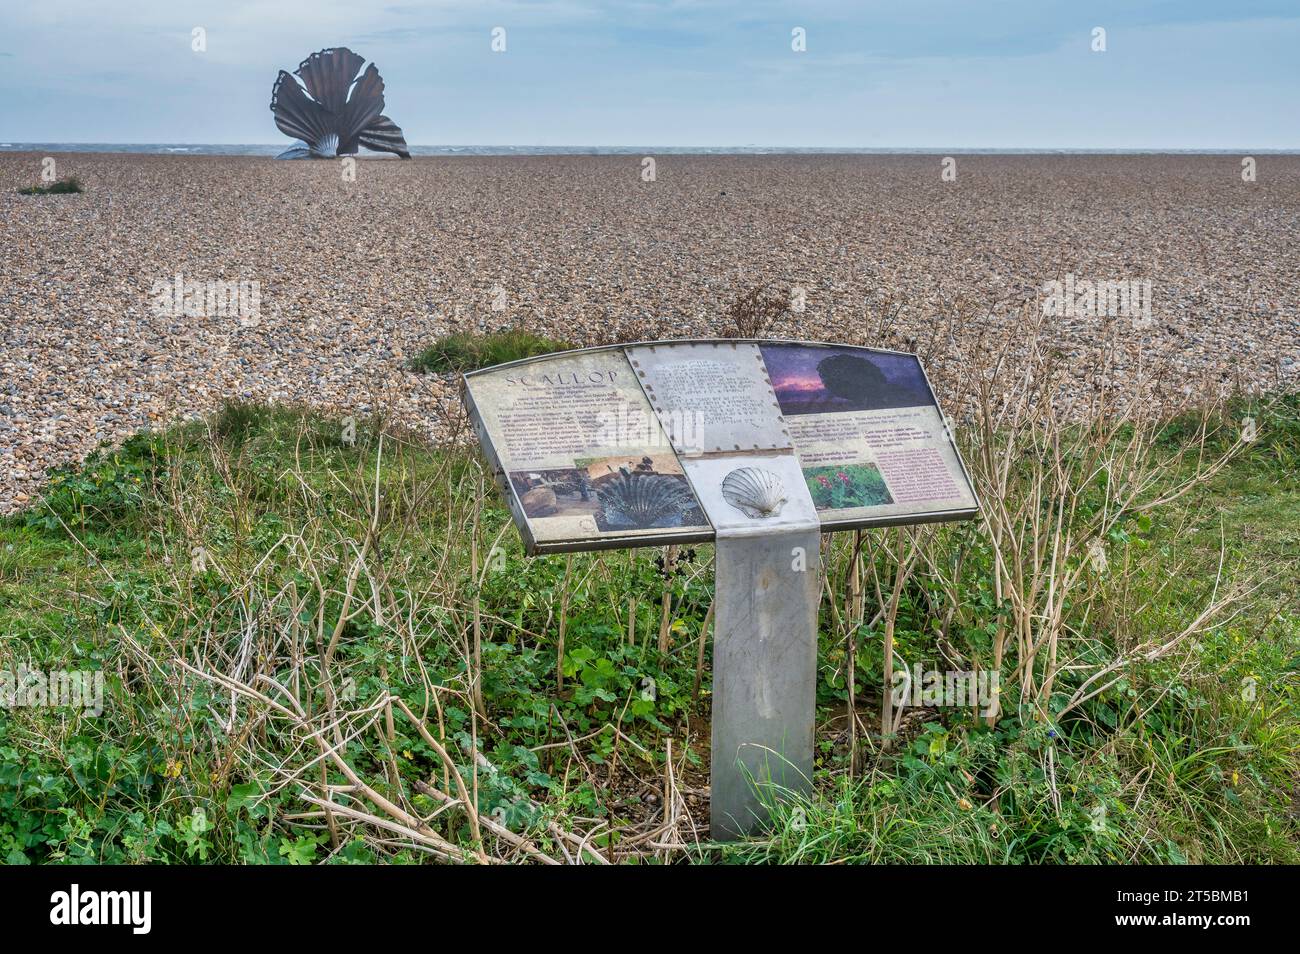 The image is of the Scallop Shell sculpture, located on the beach of the Suffolk Heritage Coast and historical resort town of Aldeburgh Stock Photo